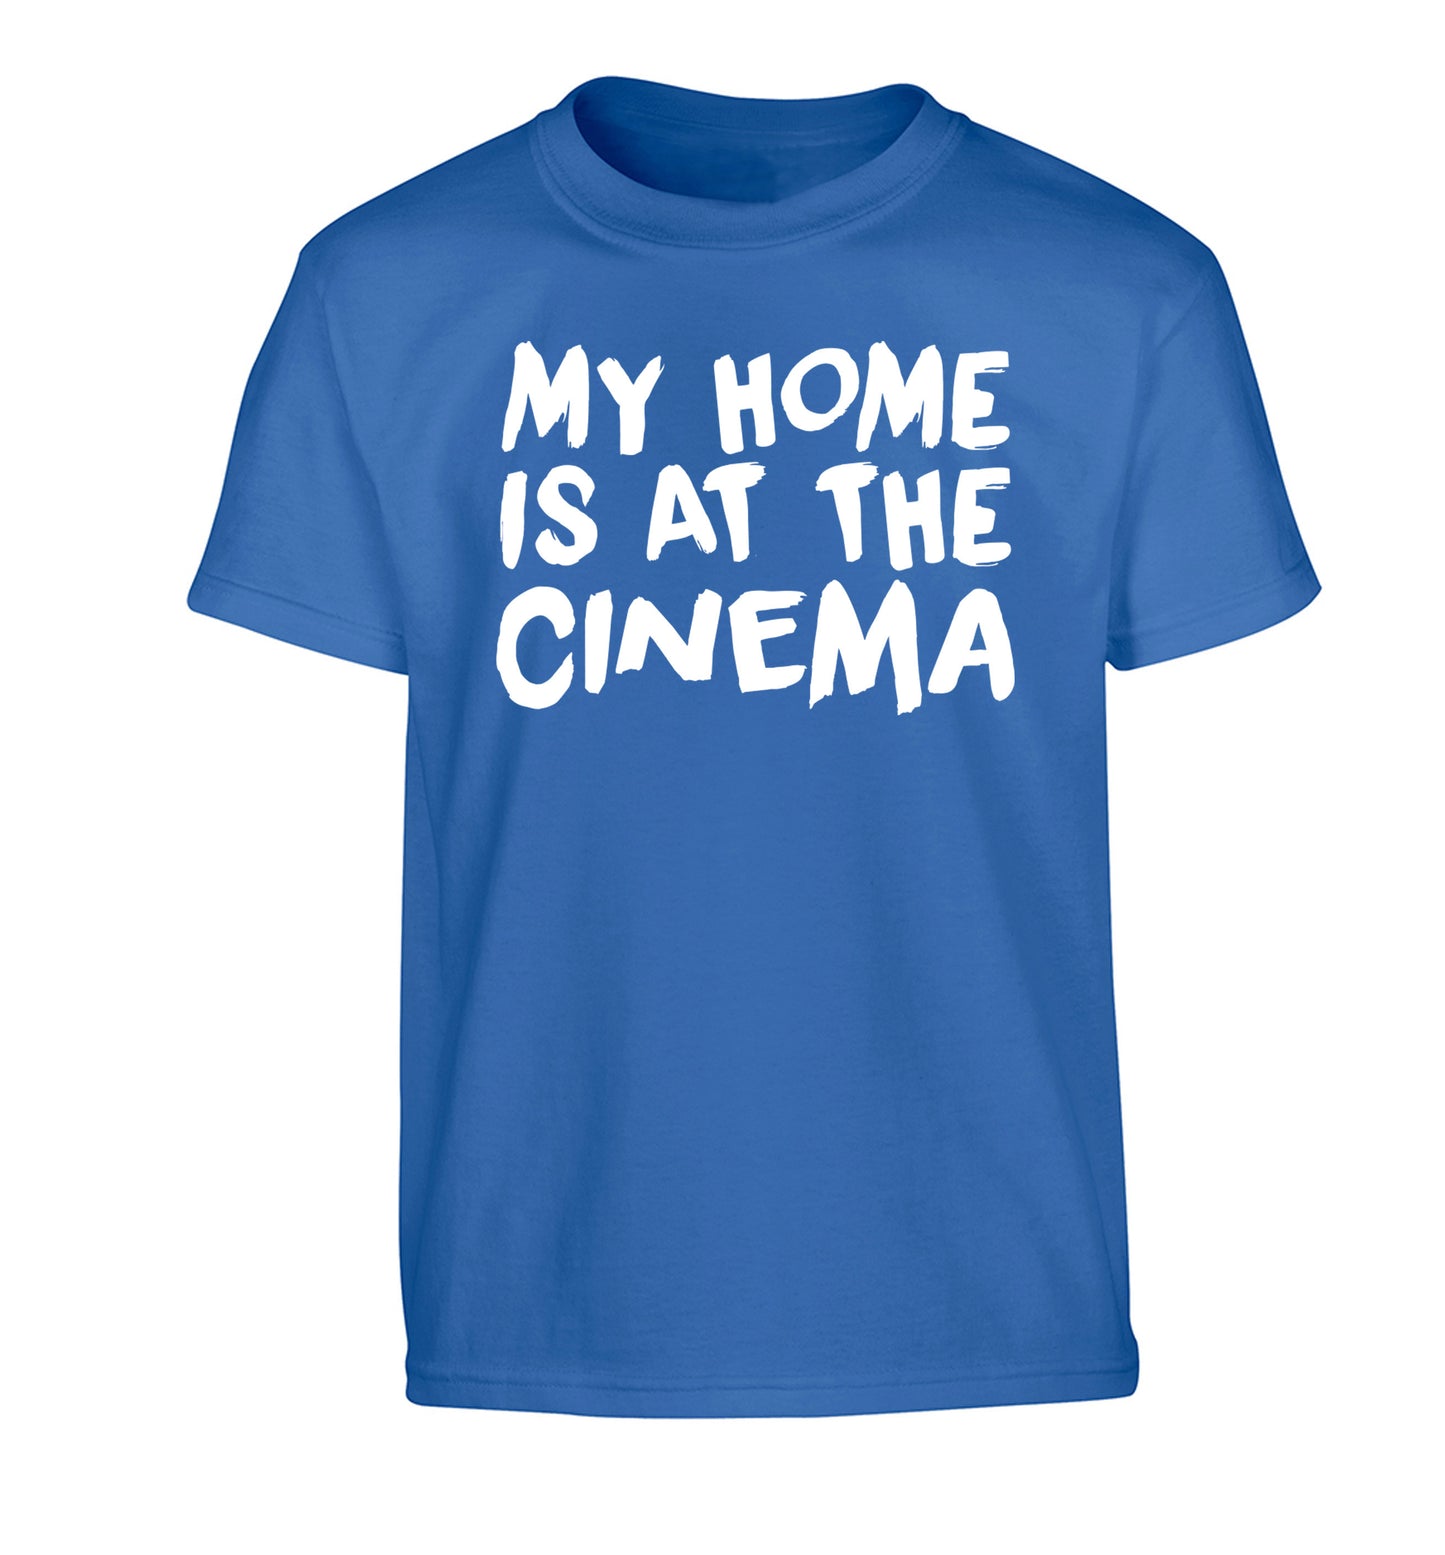 My home is at the cinema Children's blue Tshirt 12-14 Years